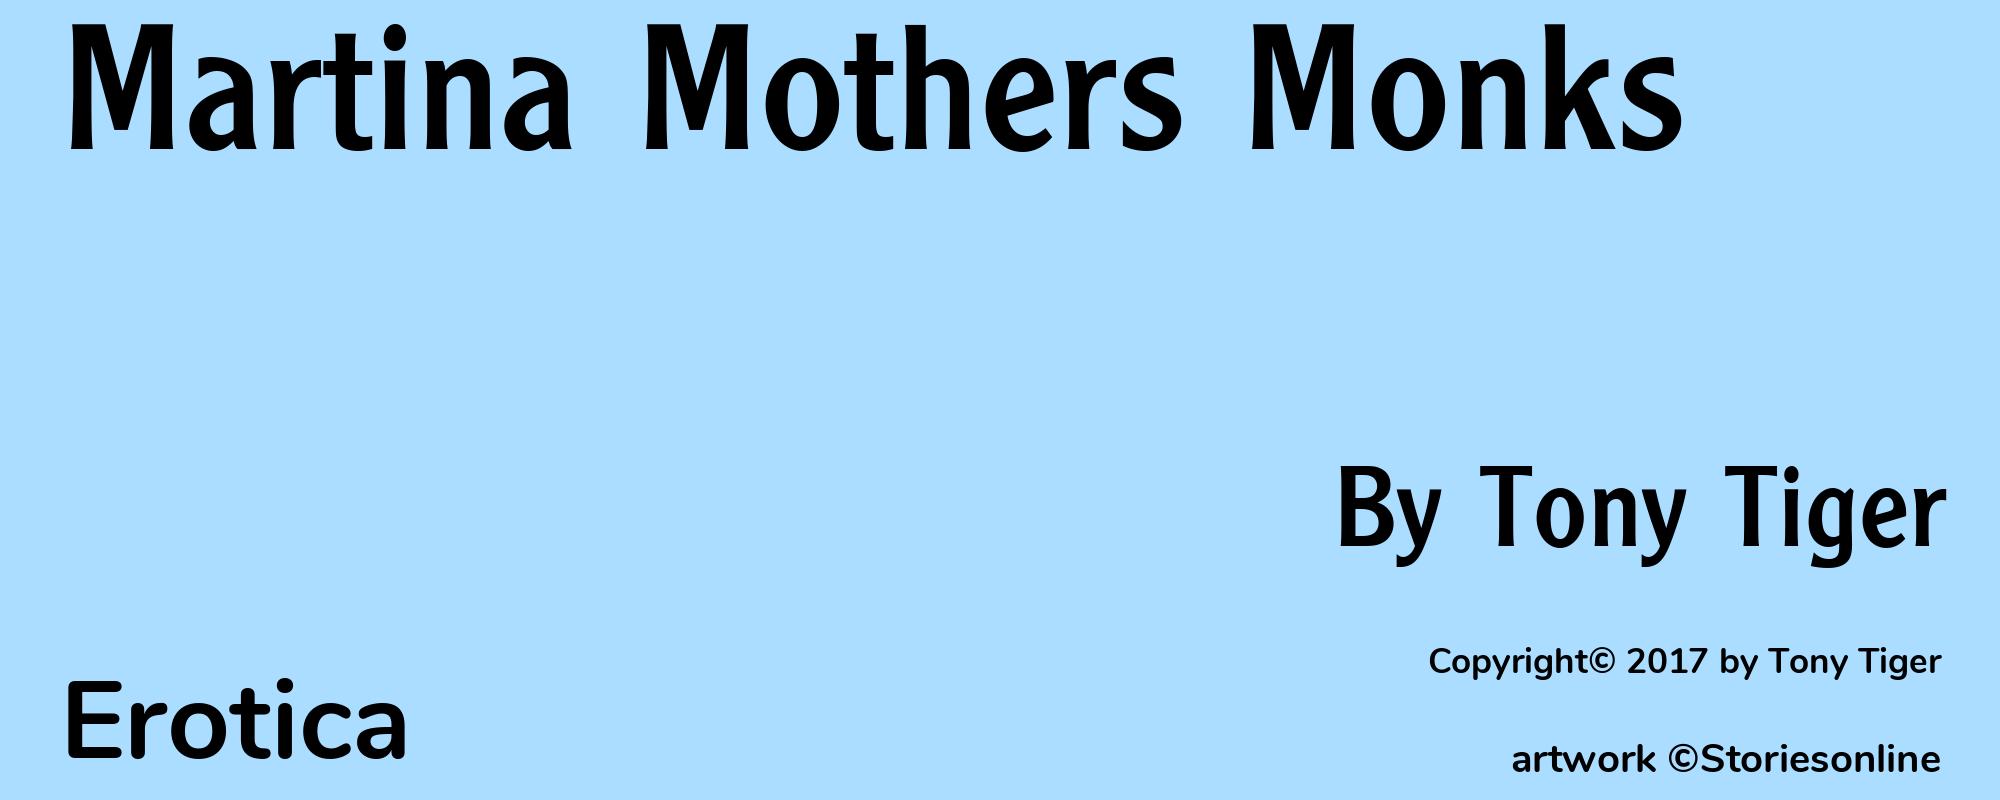 Martina Mothers Monks - Cover